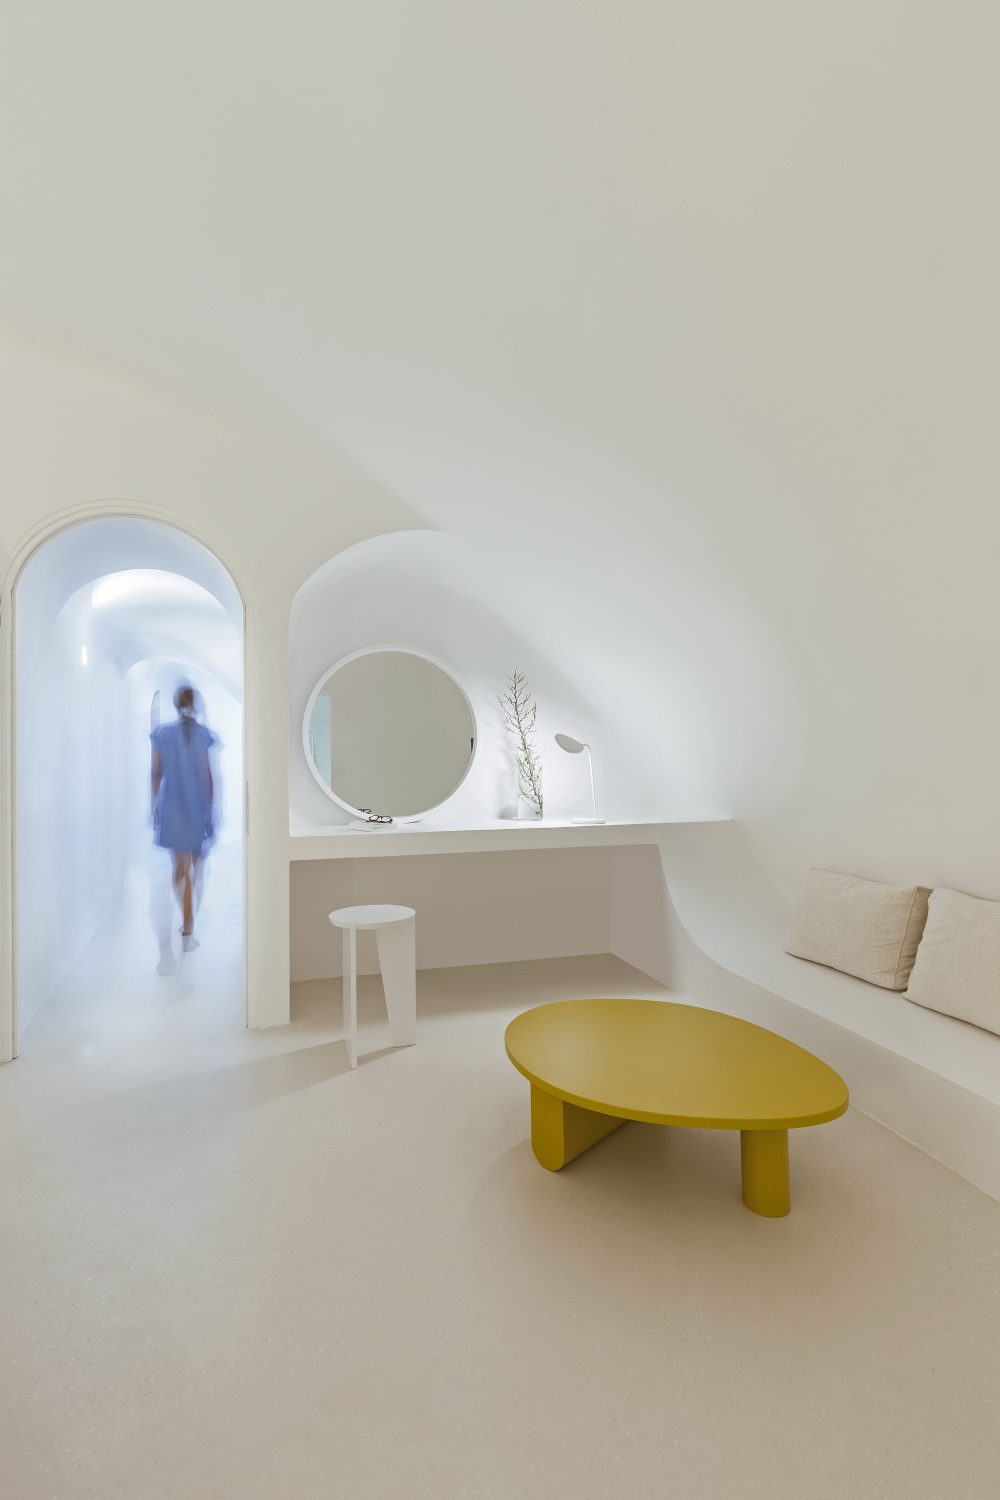 Summer Cave House in Santorini by Kapsimalis Architects